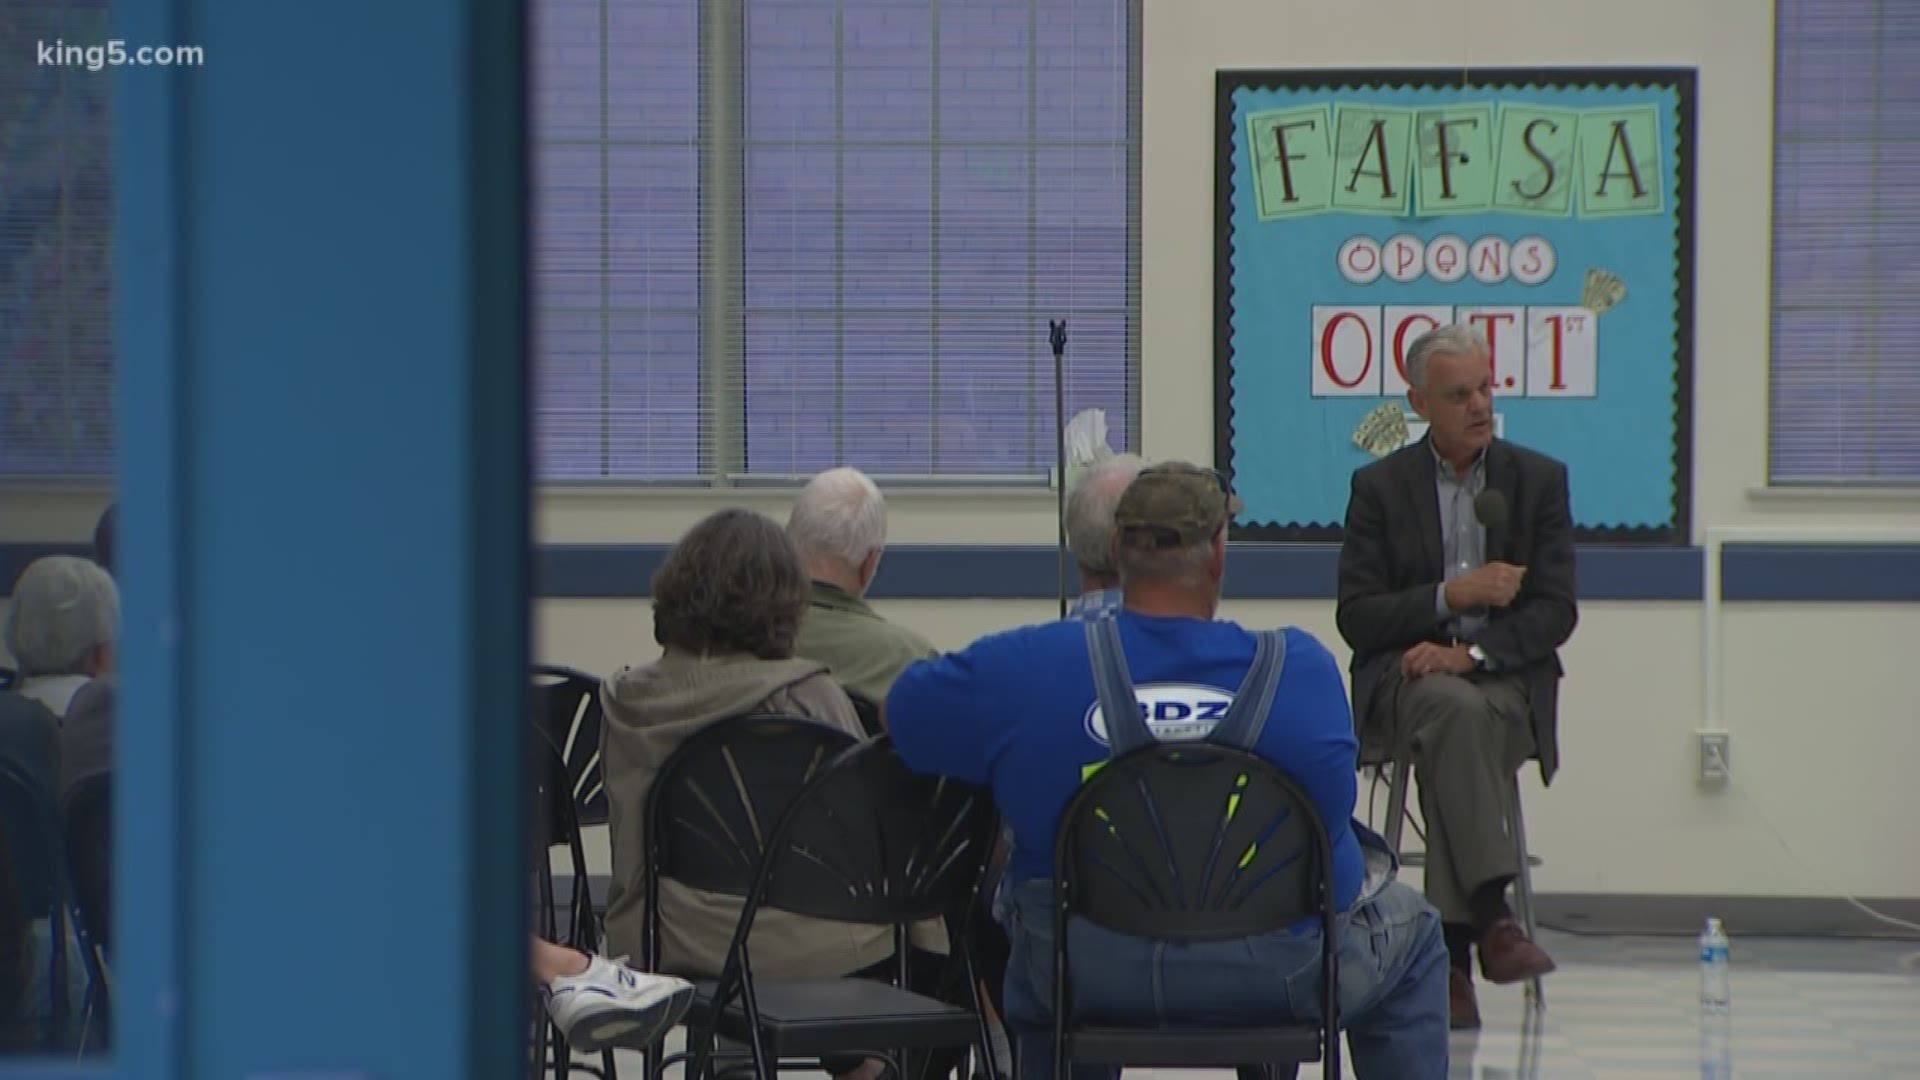 Housing Hope hosted a meeting to discuss its controversial proposal to build low-income apartments in Everett Thursday night. KING 5's Tony Black reports.